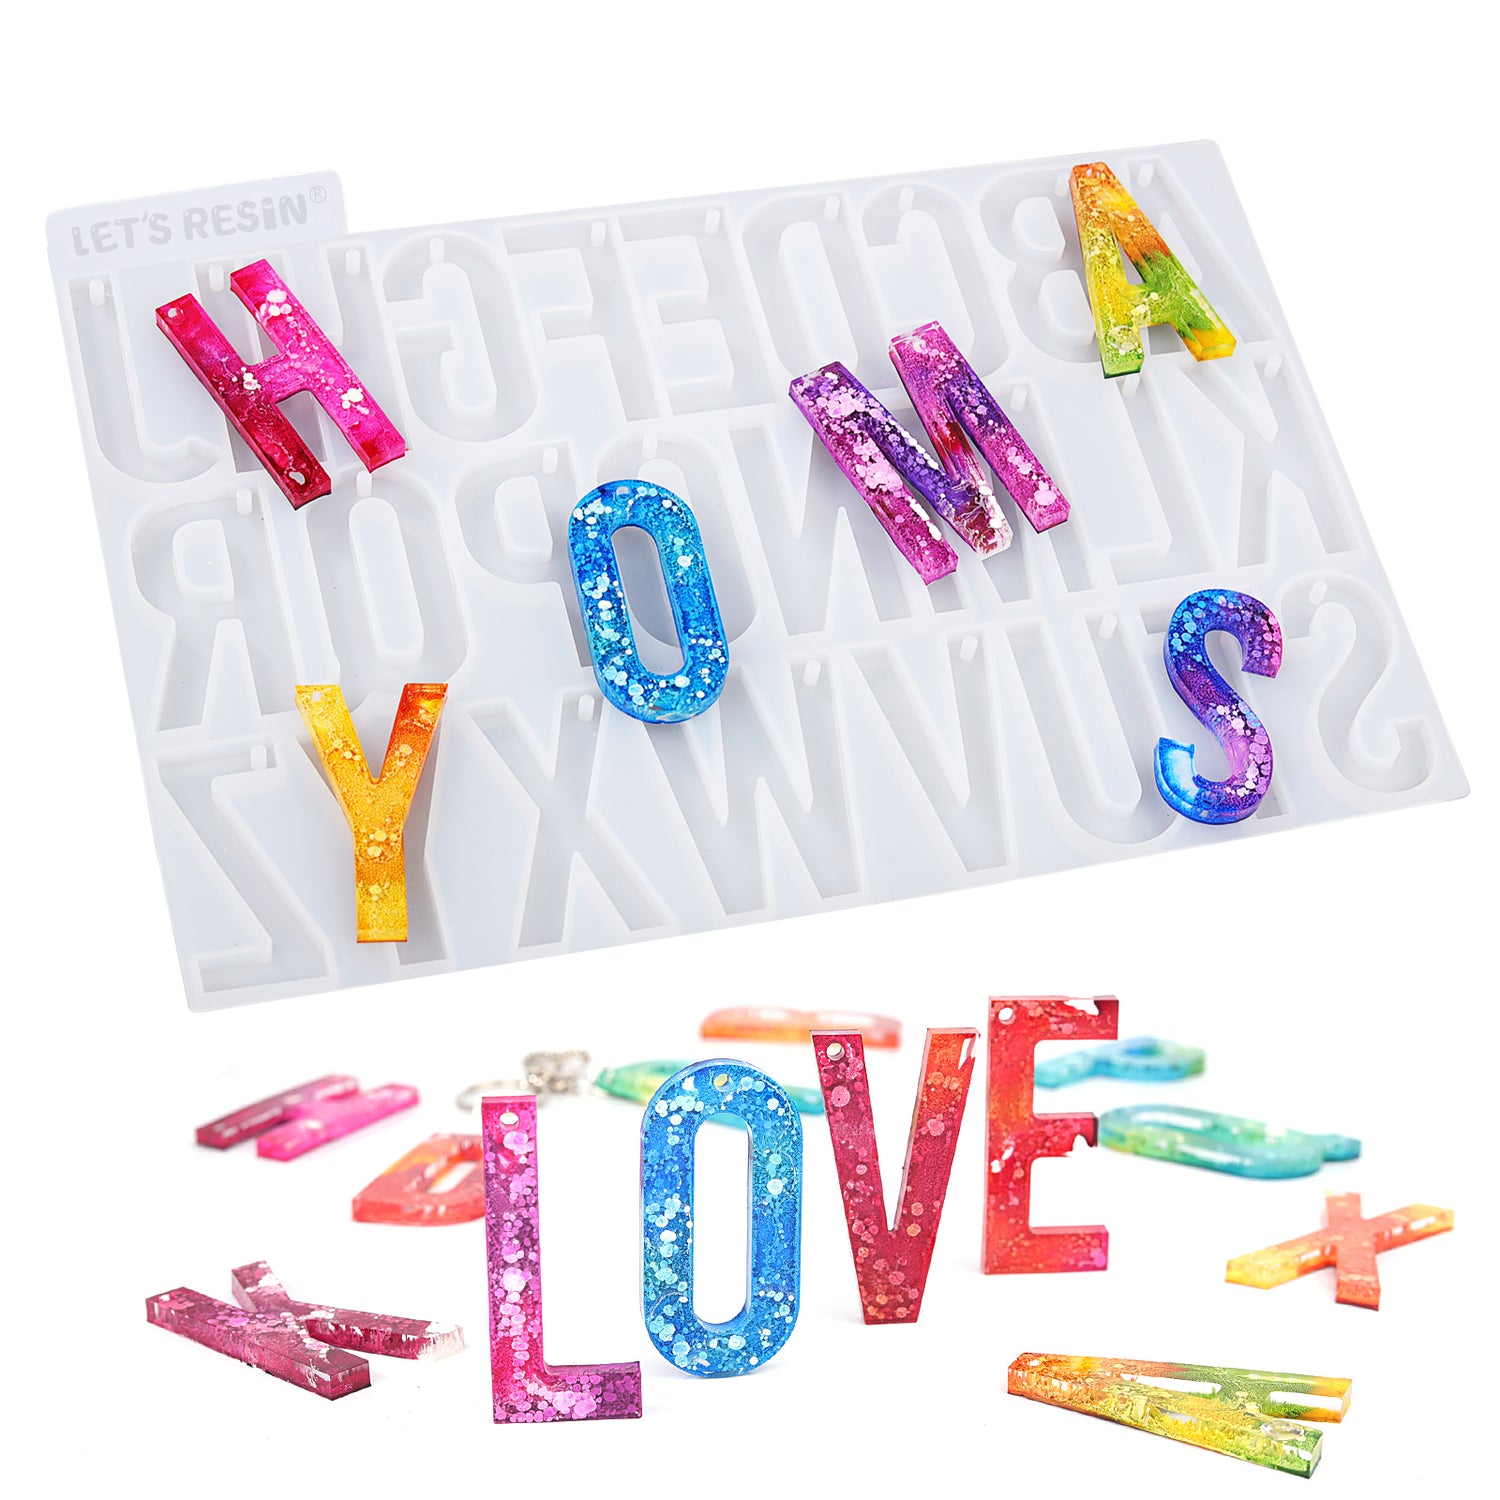 Resin Letter Molds, Silicone Alphabet Resin Molds Kit, Silicone